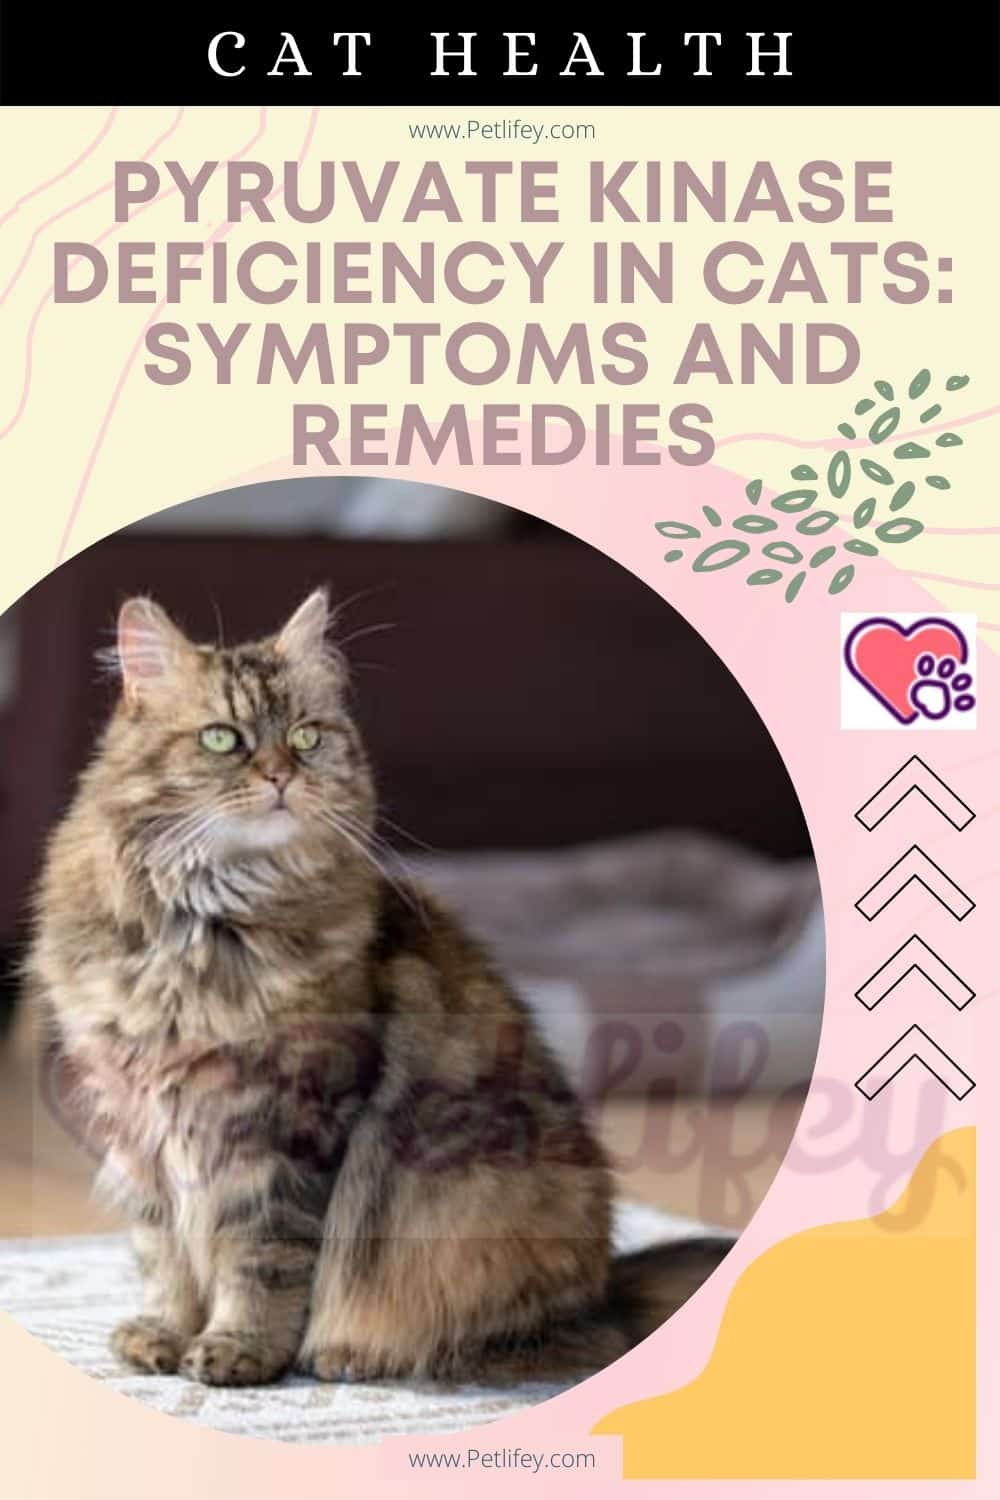 Pyruvate kinase deficiency in cats